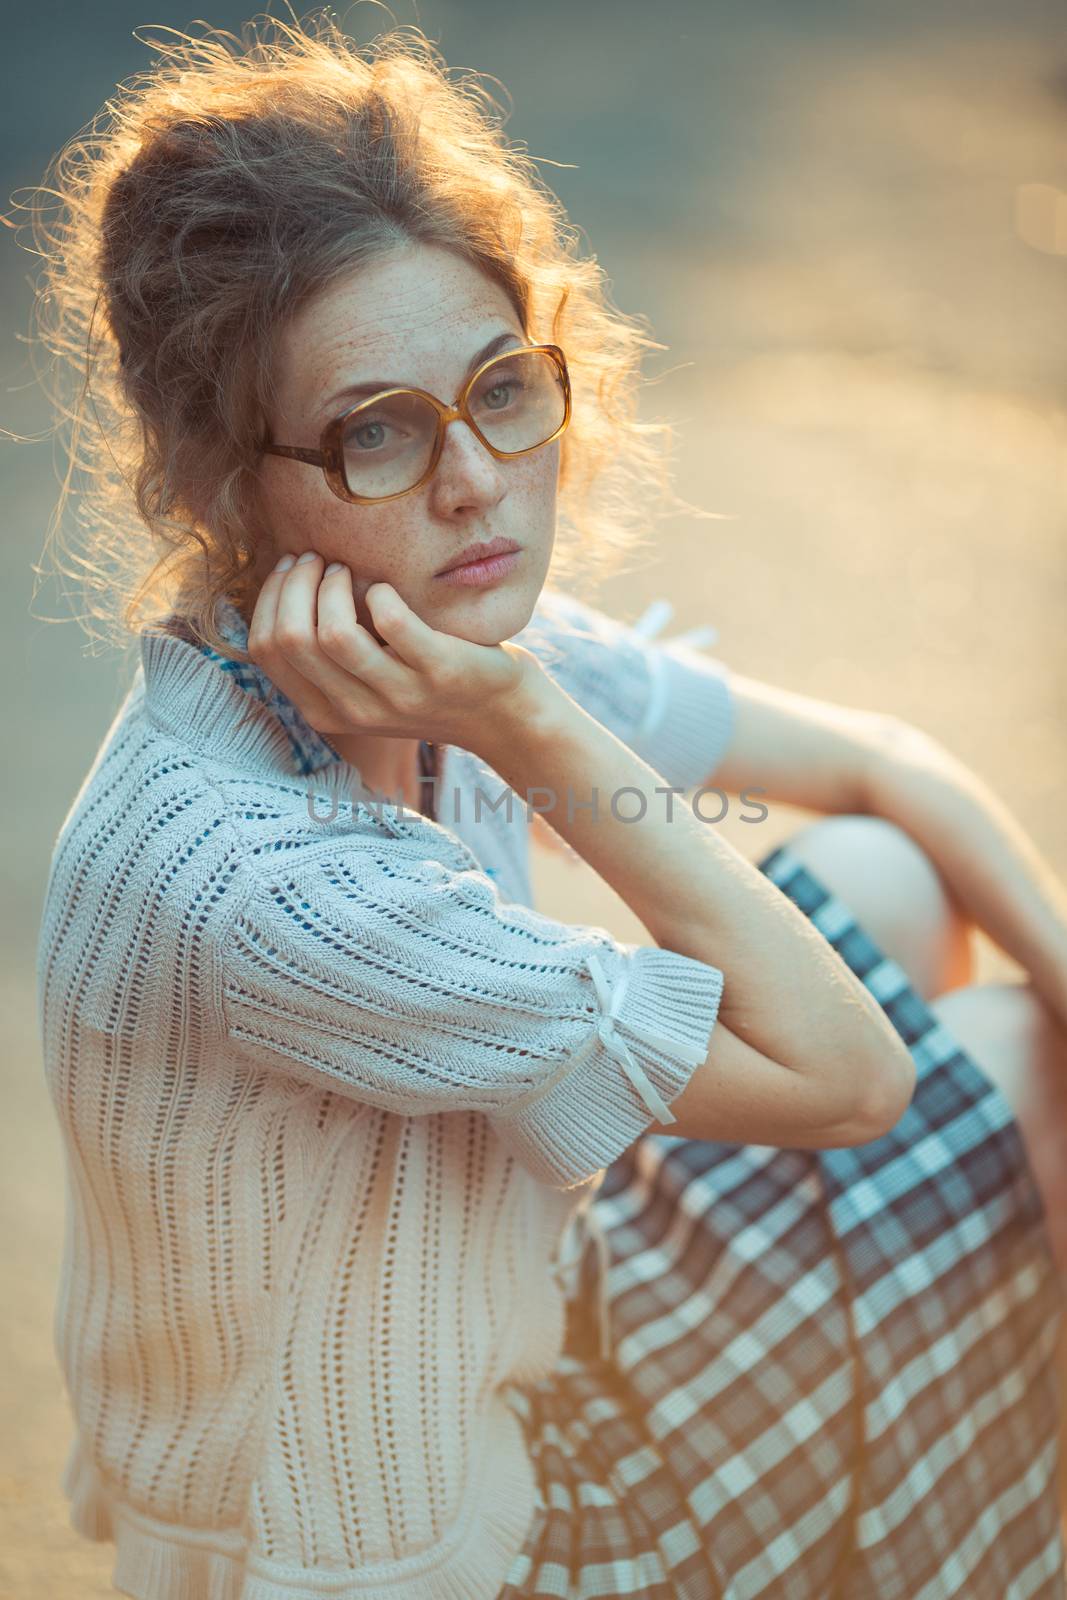 Funny girl student with glasses and a vintage dress sitting outdoors with a thoughtful look